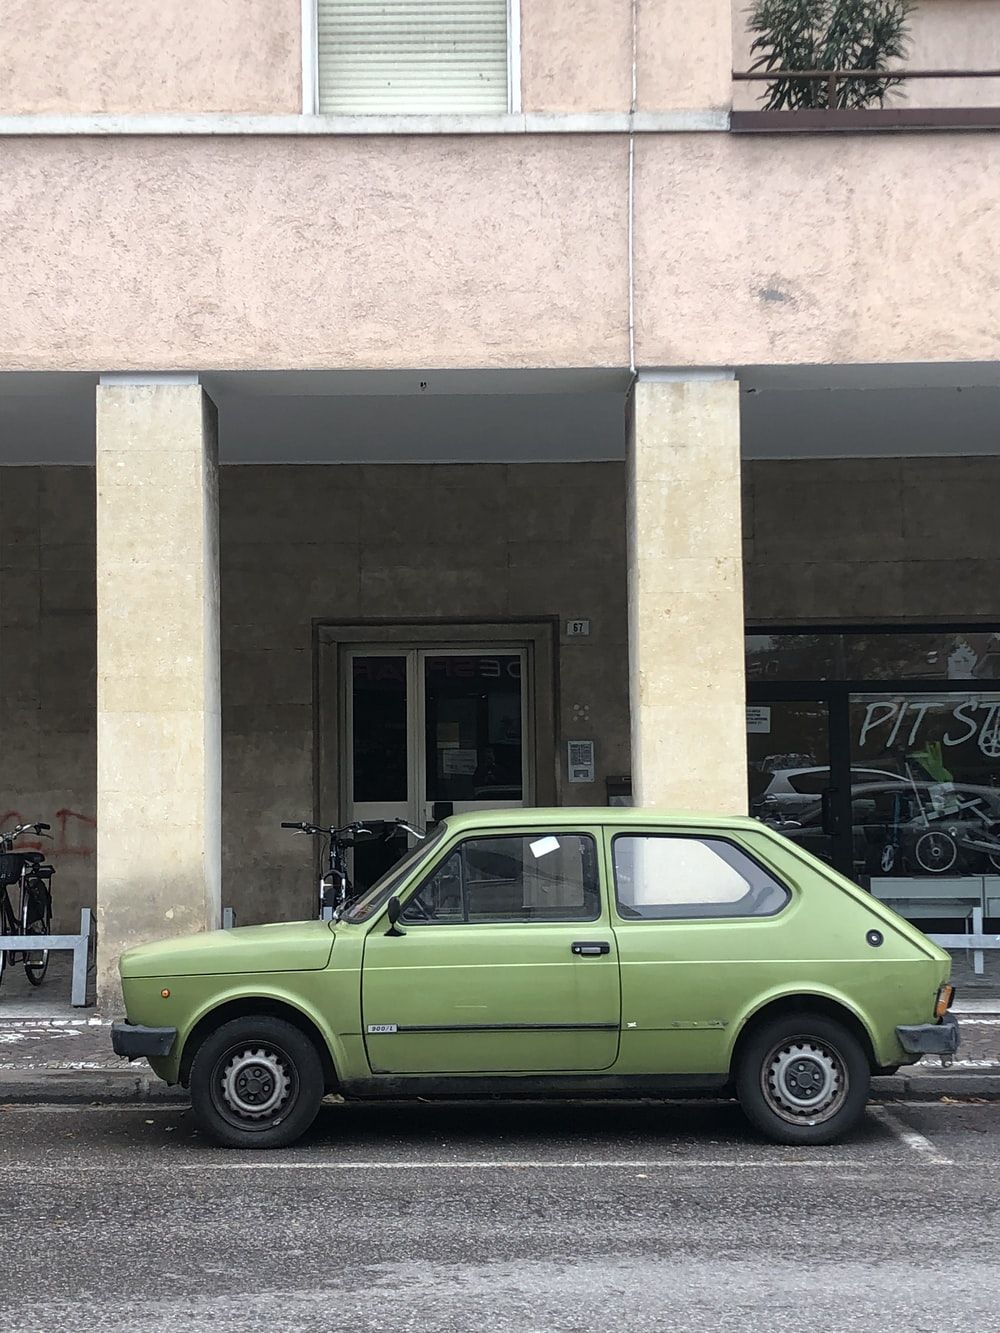 Italian Car Picture. Download Free Image